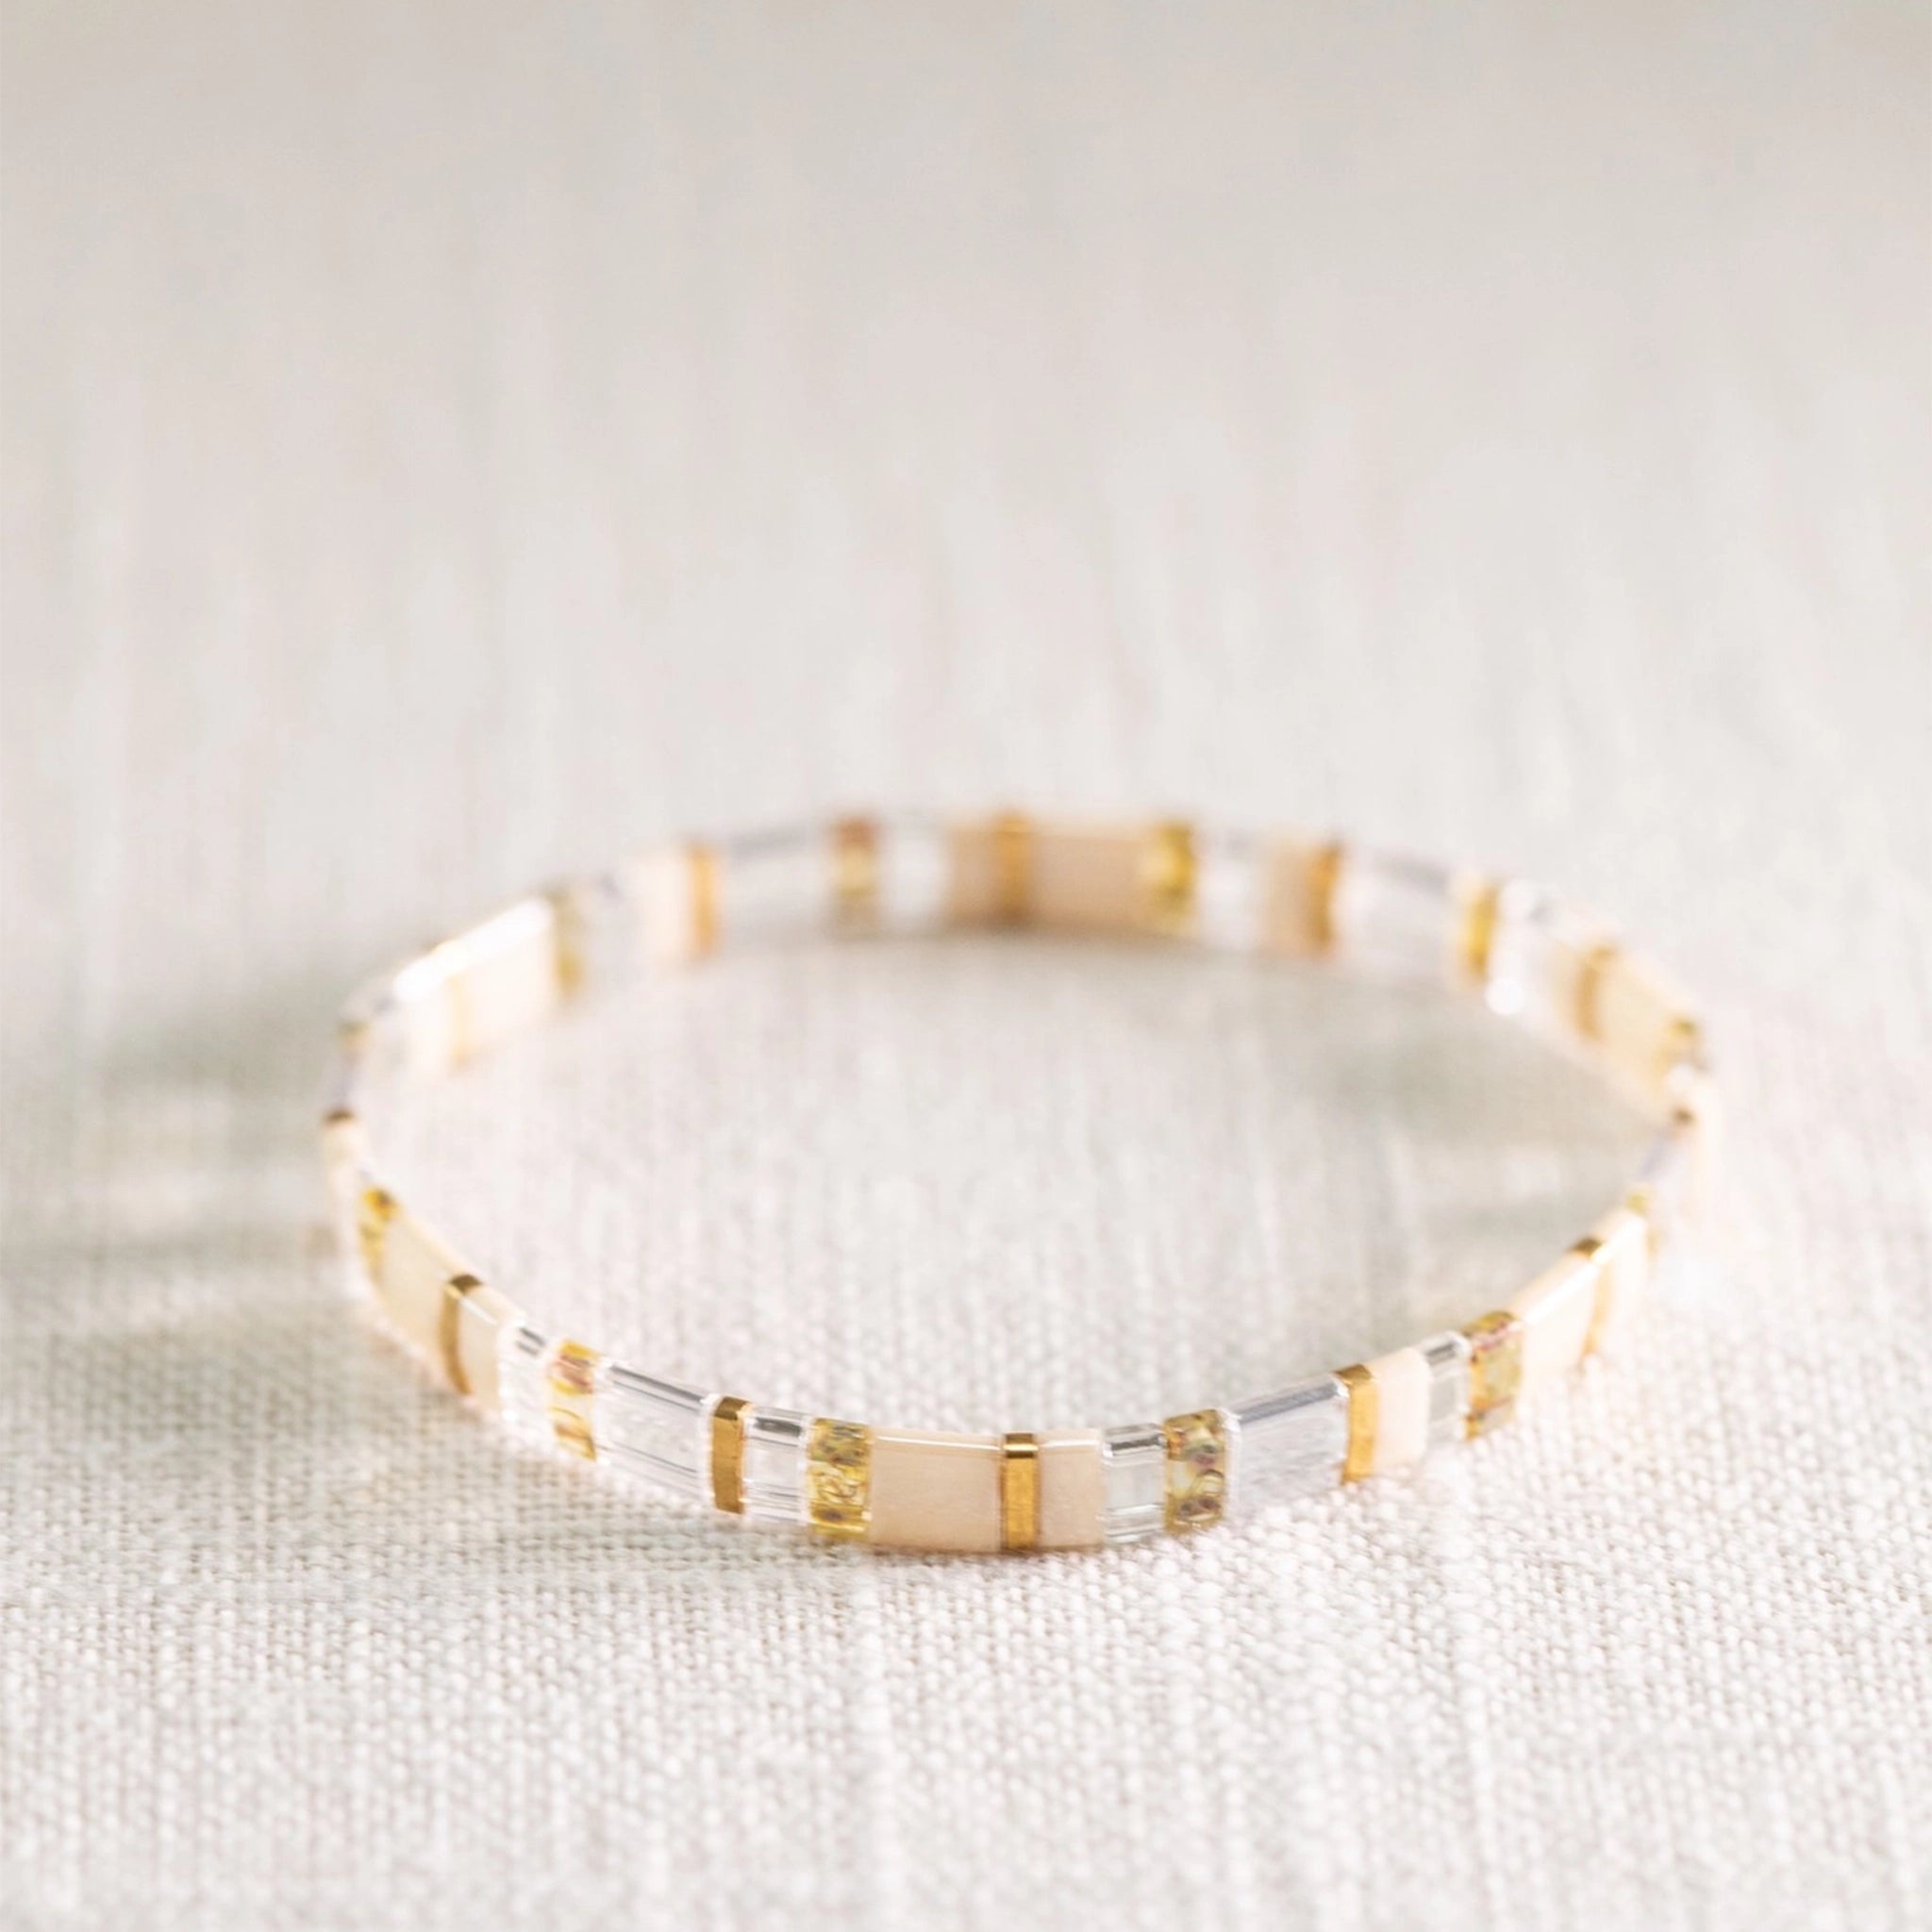 A gold, clear and neutral colored bracelet with a variation of alternating beads. 